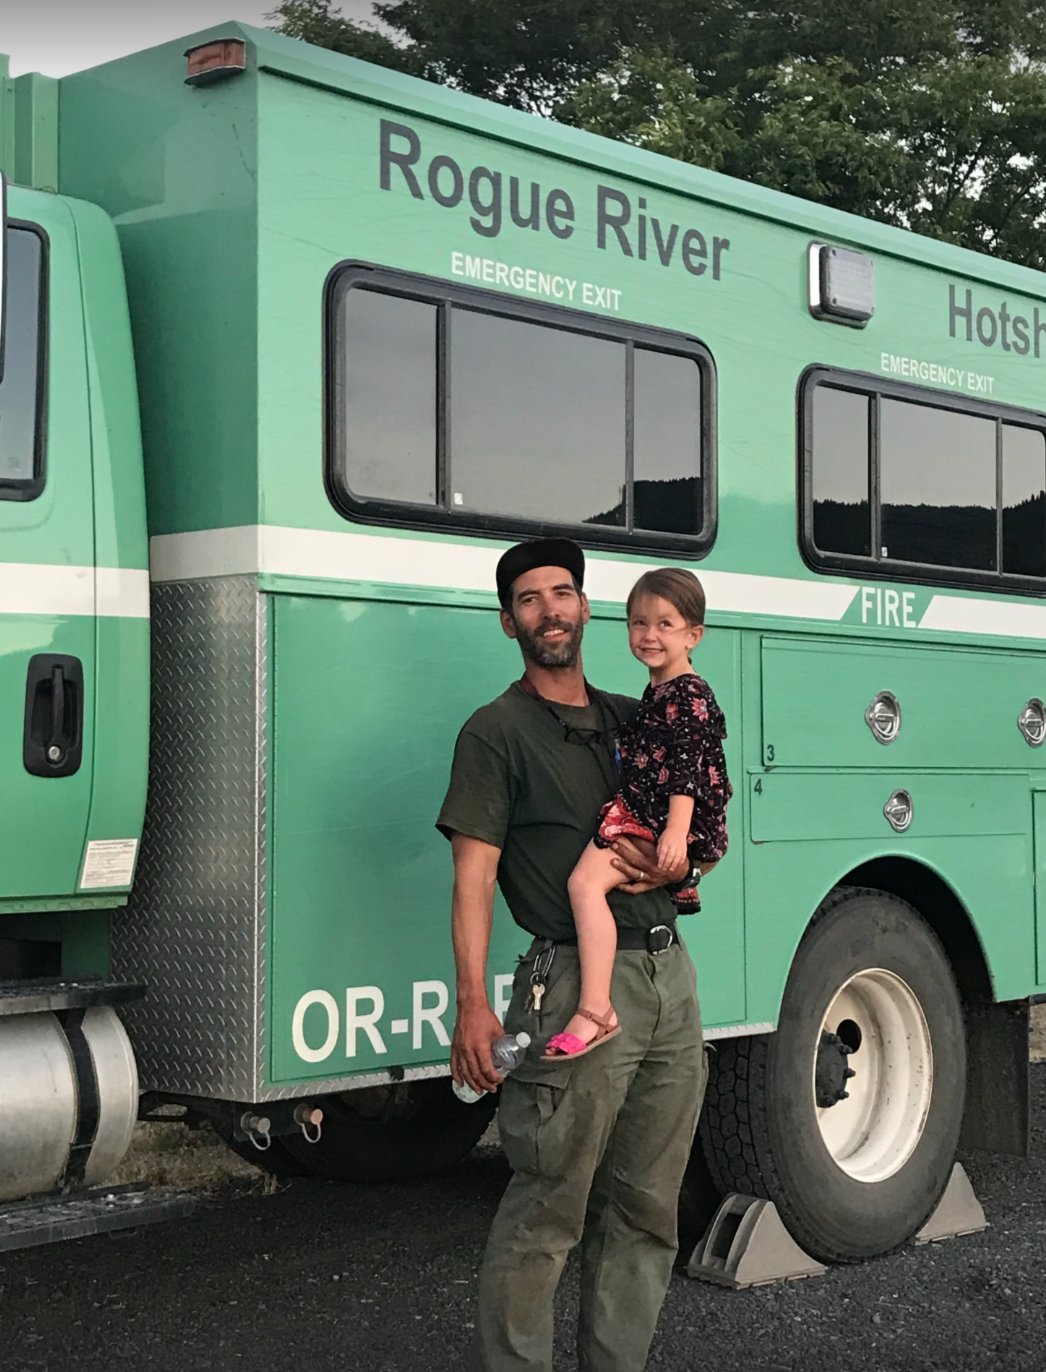 Luke Mayfield with his daughter during his time on a Hotshot crew in Rogue River, Oregon